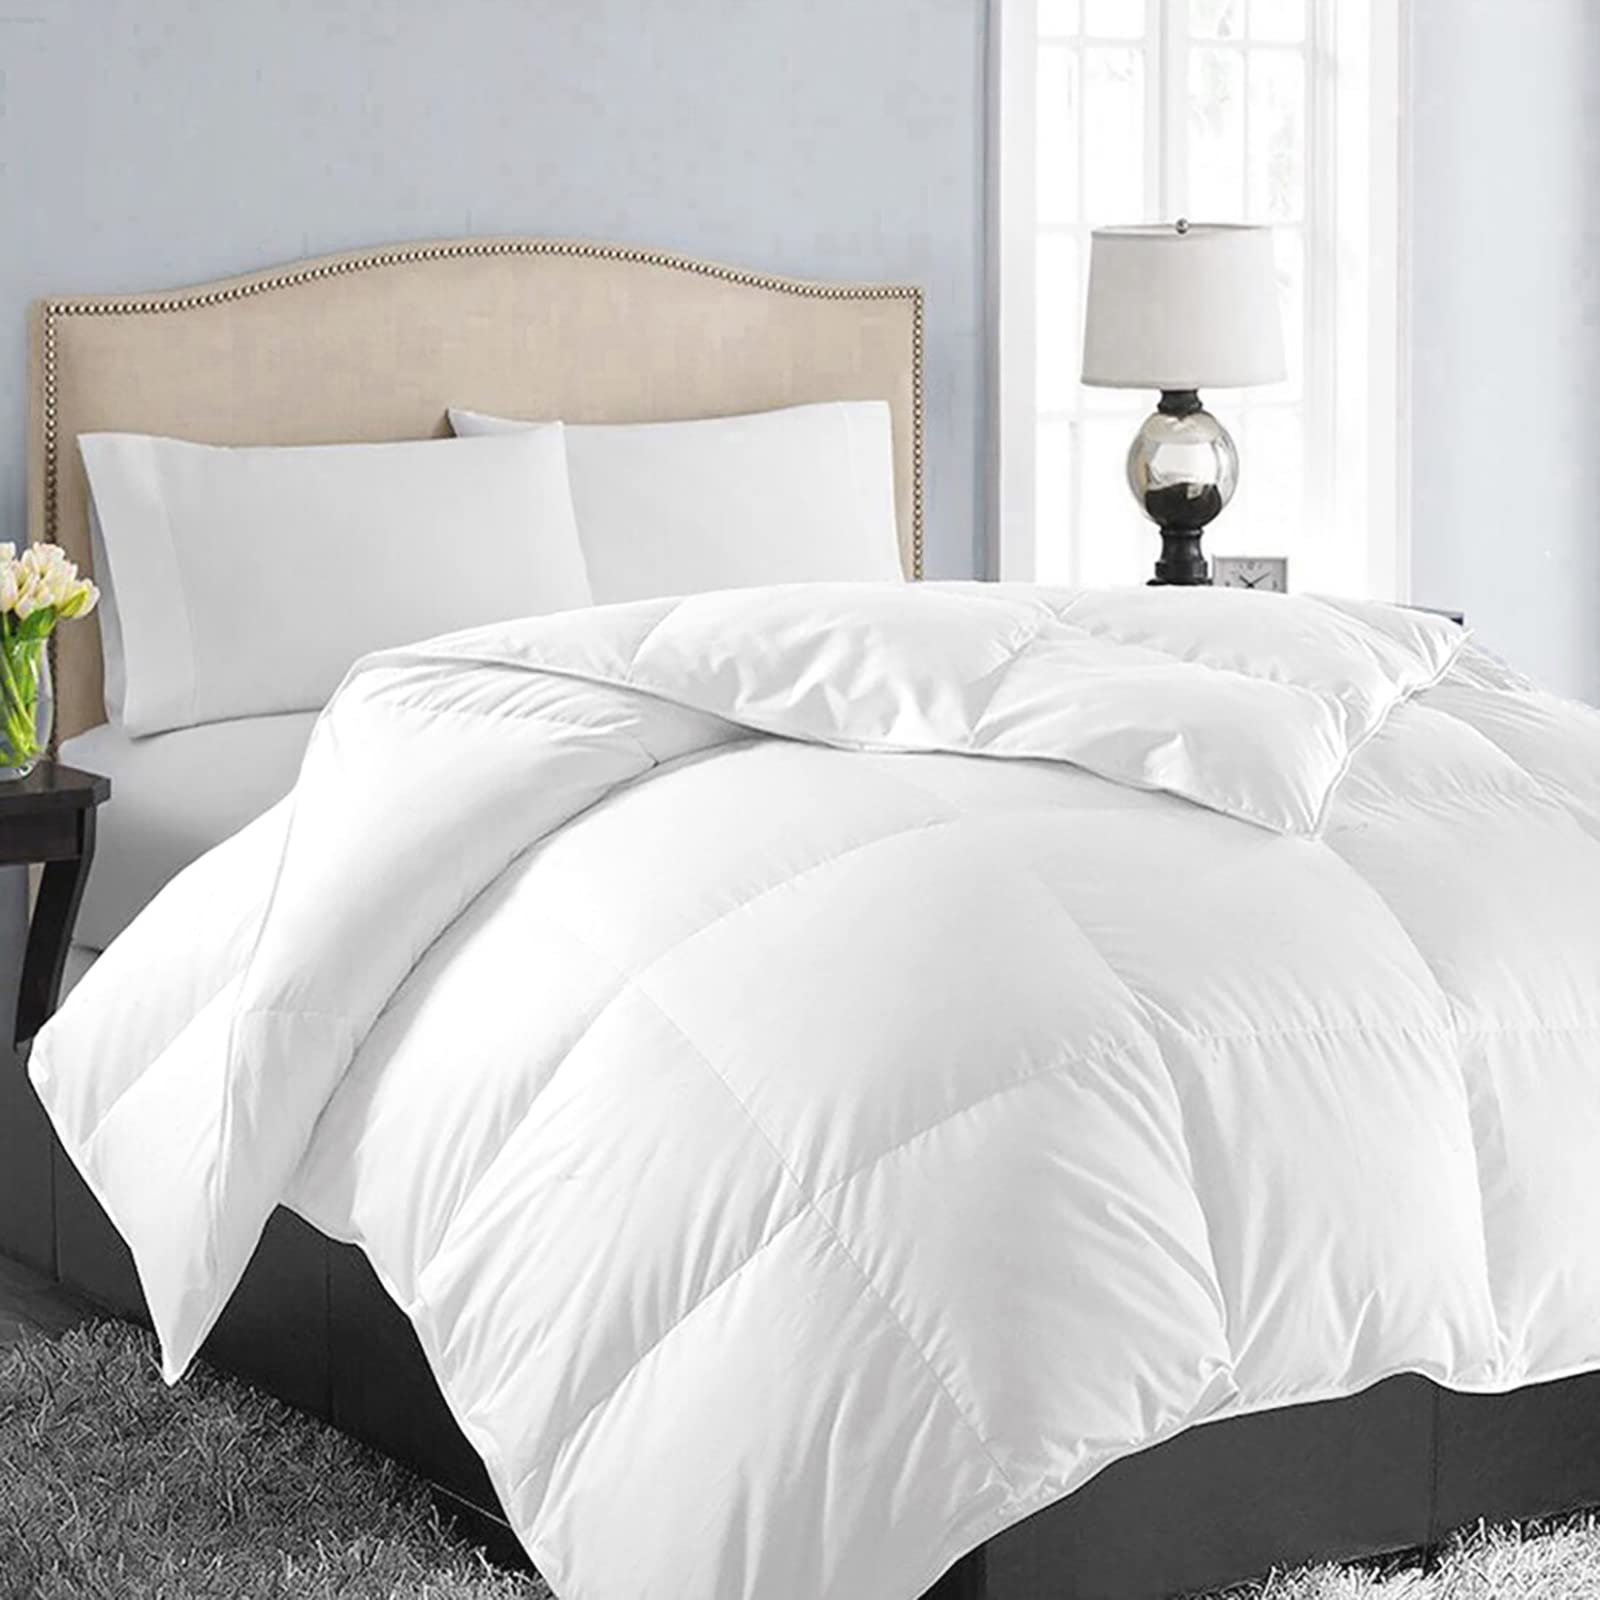 Book Cover EASELAND All Season Queen Size Soft Quilted Down Alternative Comforter Reversible Duvet Insert with Corner Tabs,Winter Summer Warm Fluffy,White,88x88 inches Queen White